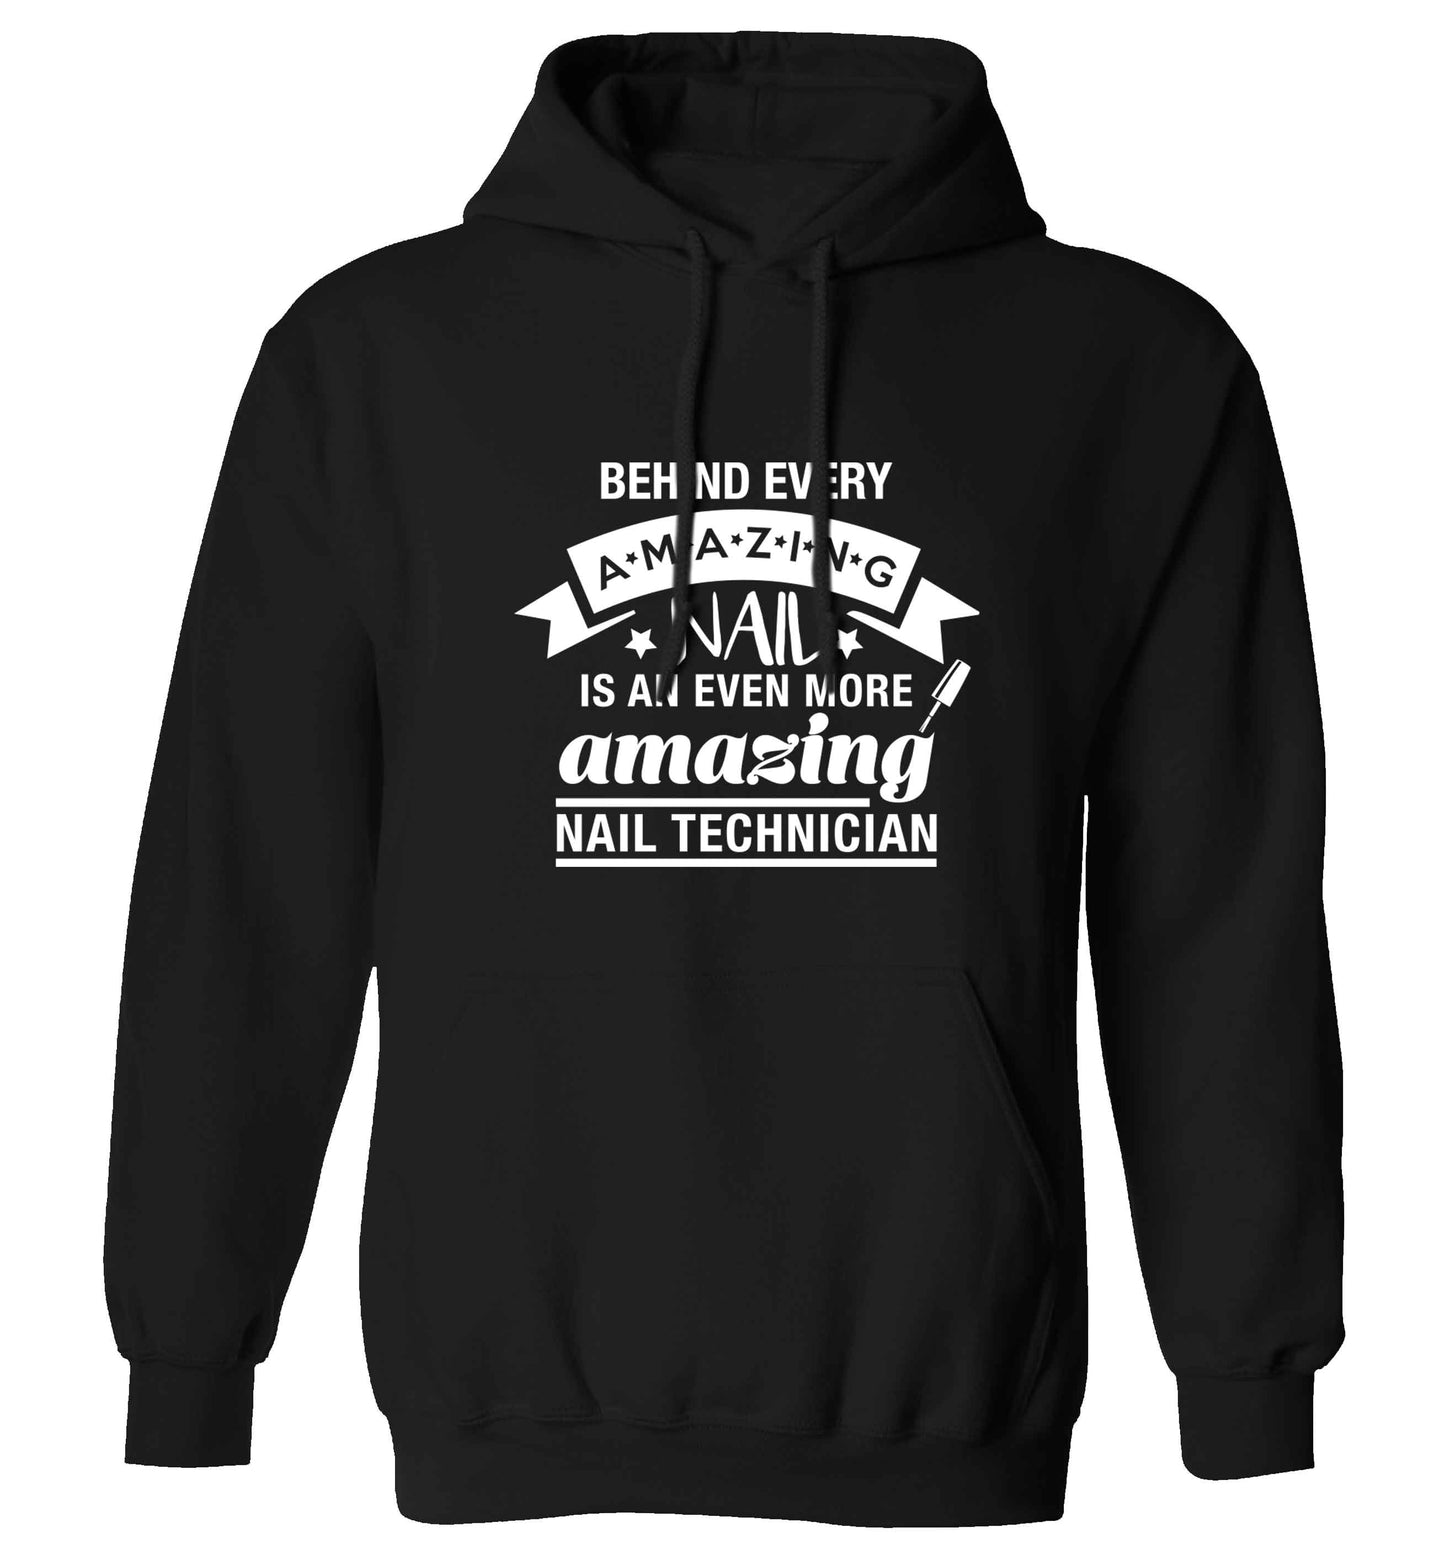 Behind every amazing nail is an even more amazing nail technician adults unisex black hoodie 2XL